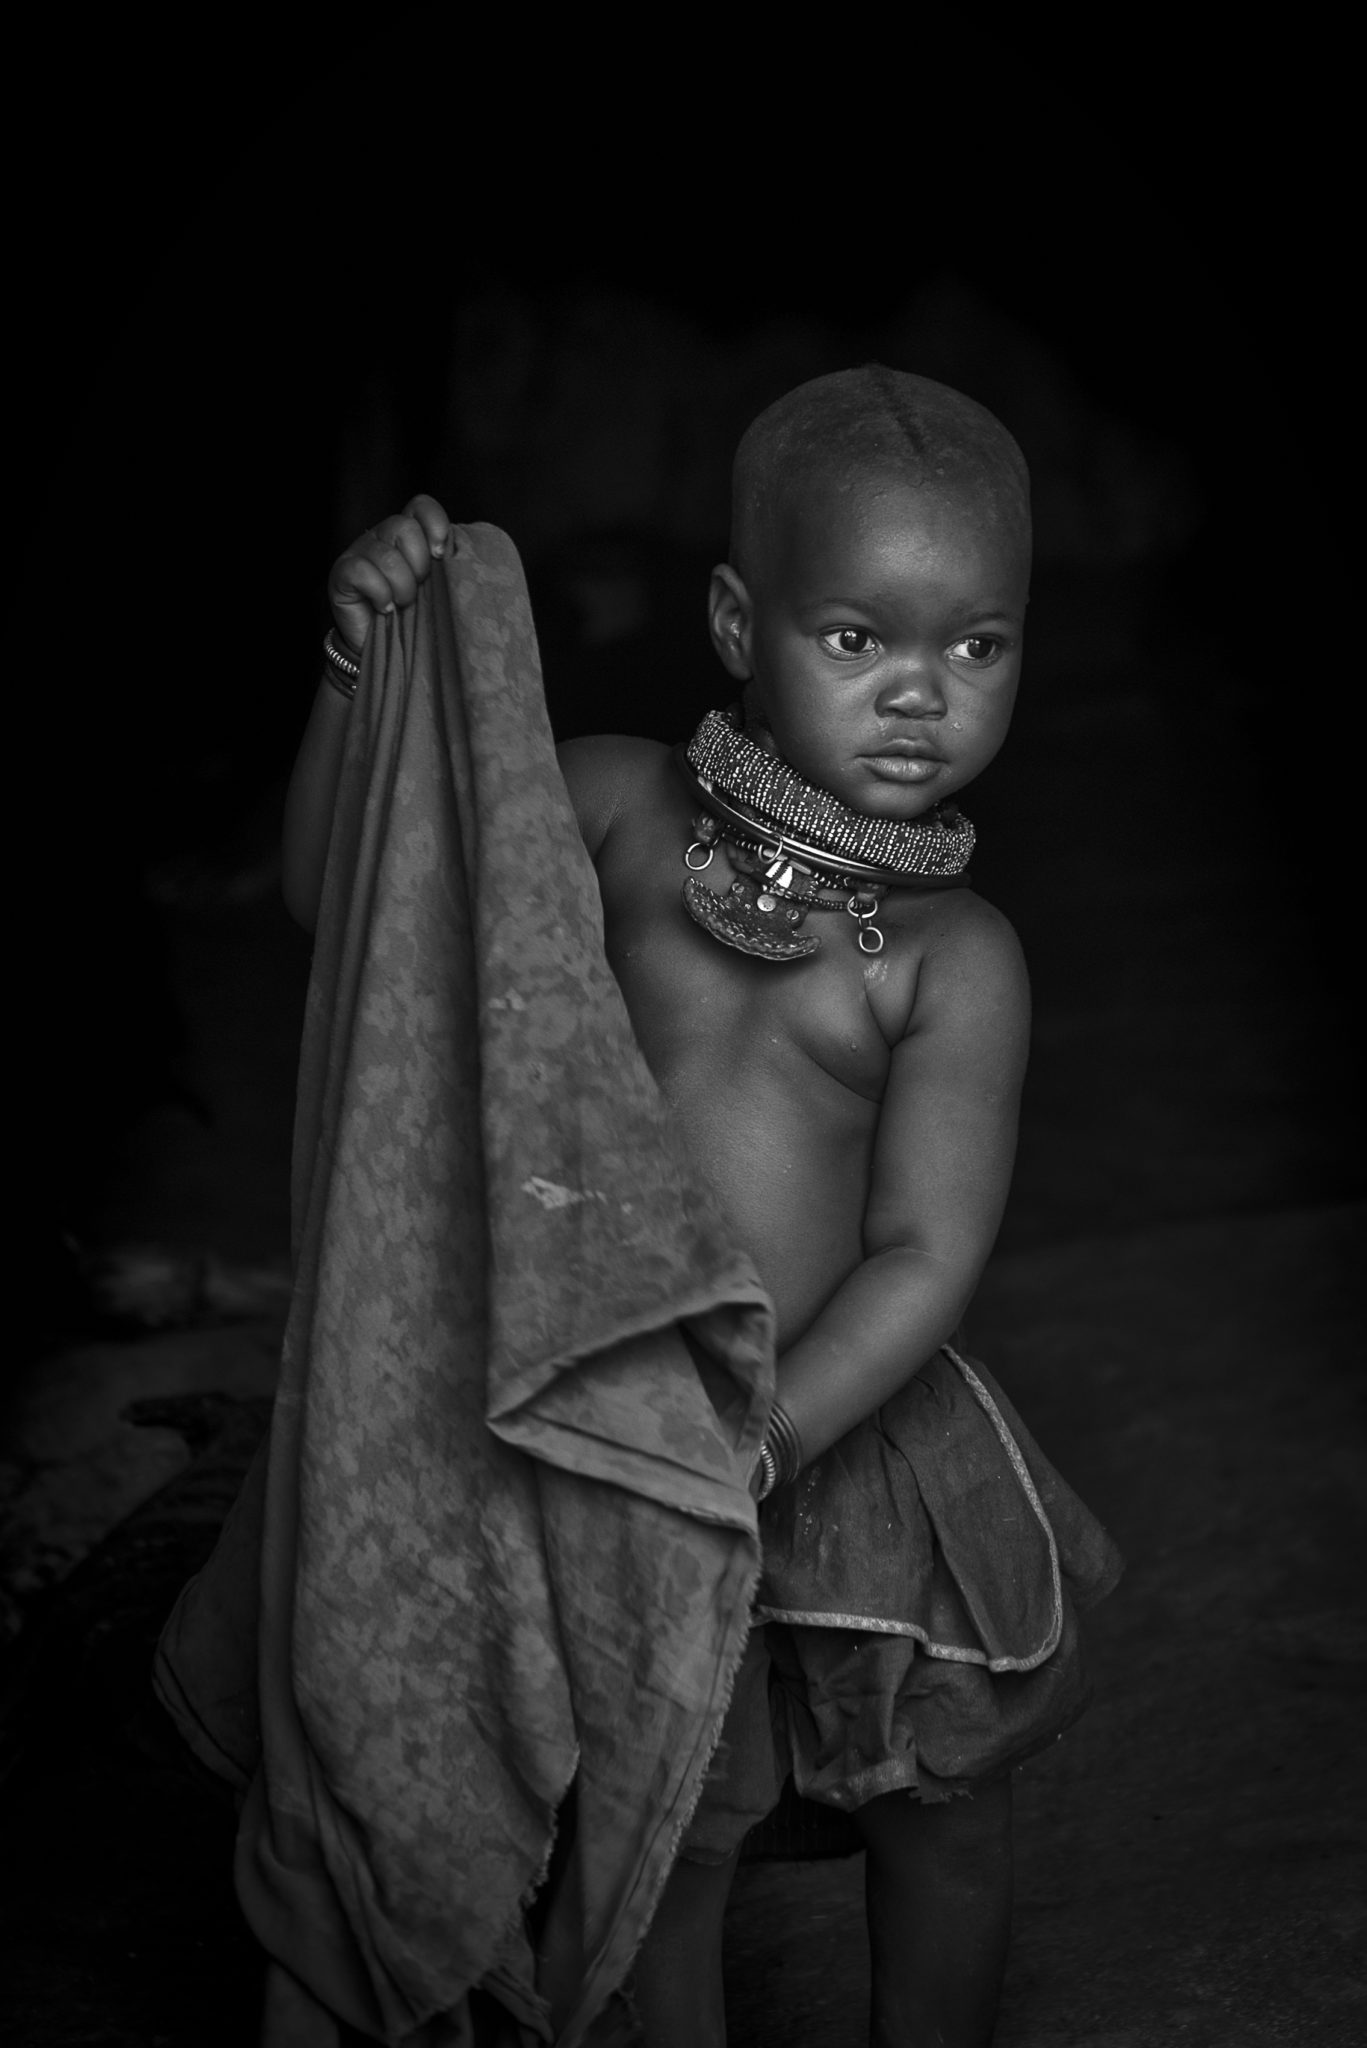 Girl with the blanket – Namibia